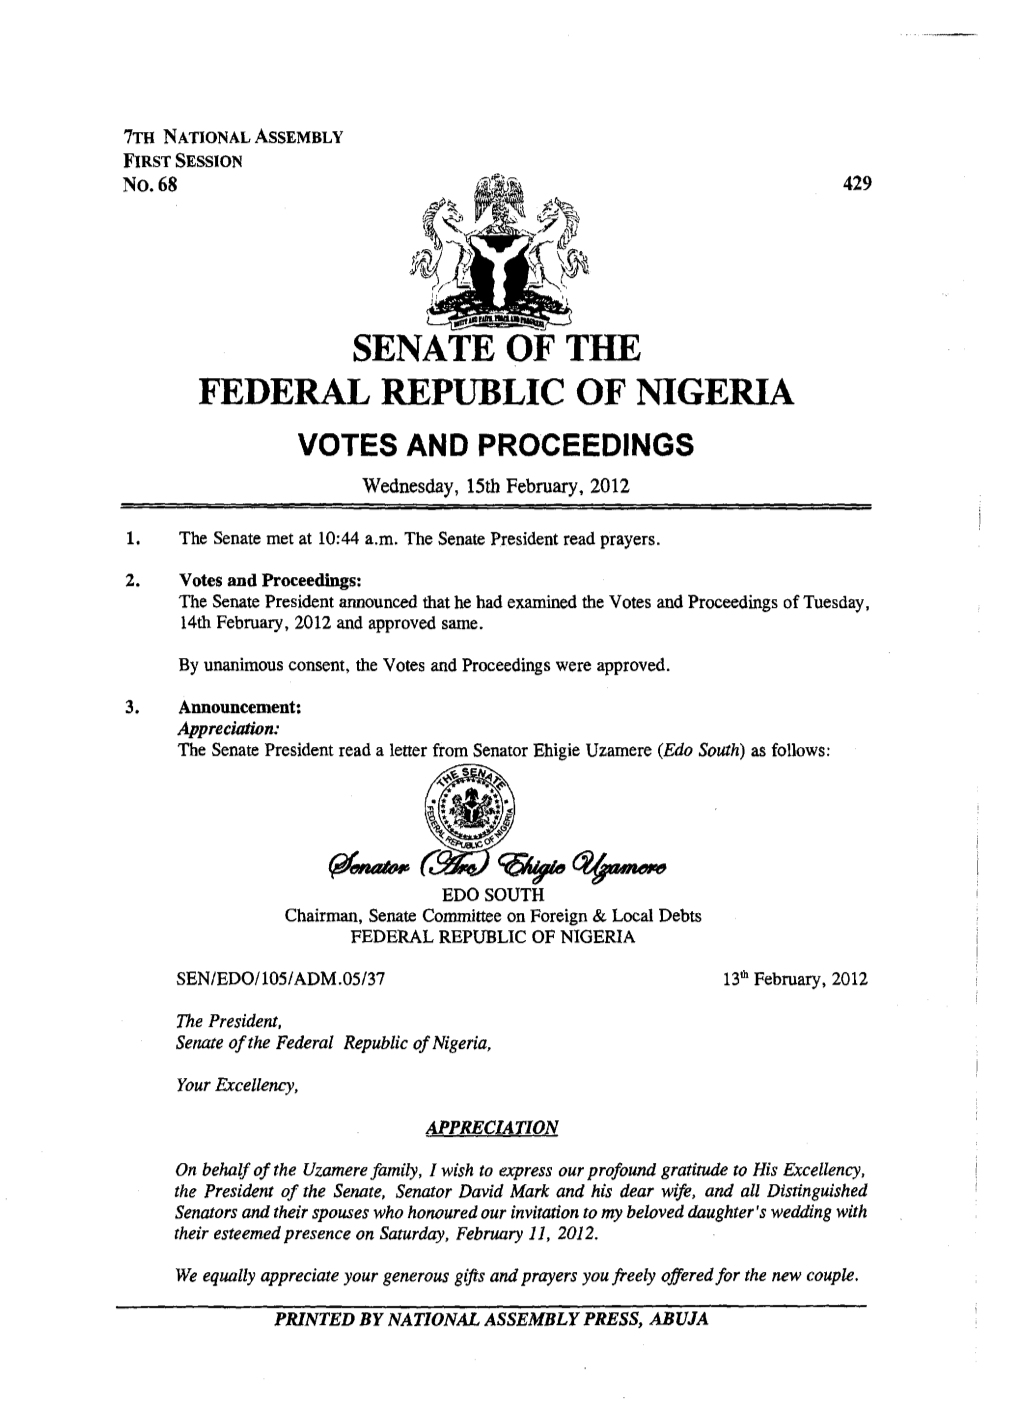 SENATE of the FEDERAL REPUBLIC of NIGERIA VOTES and PROCEEDINGS Wednesday, 15Th February, 2012